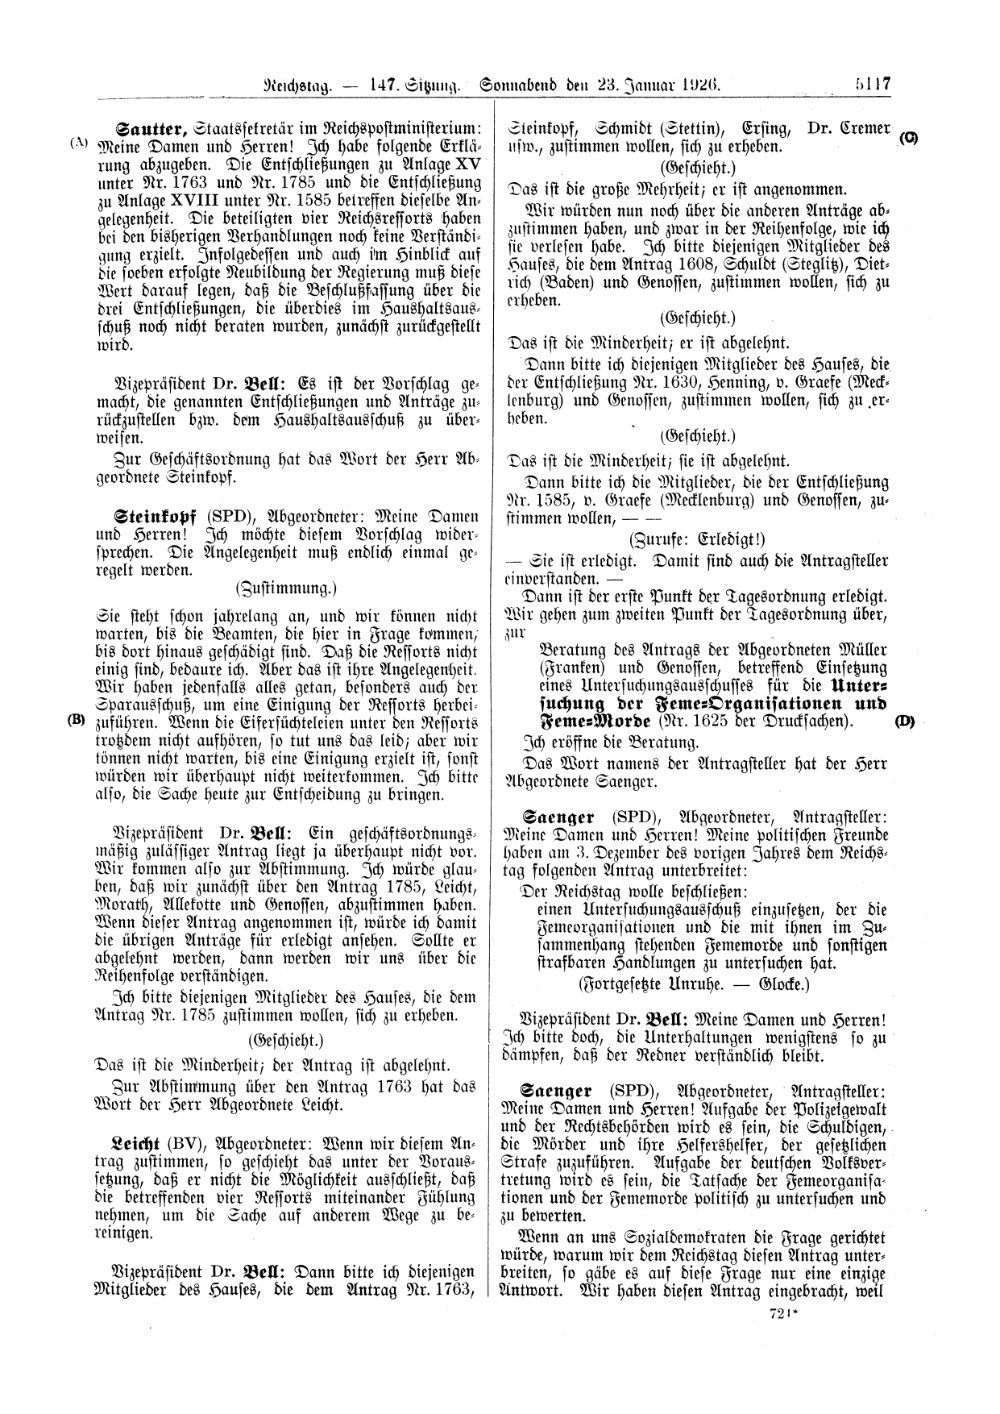 Scan of page 5117